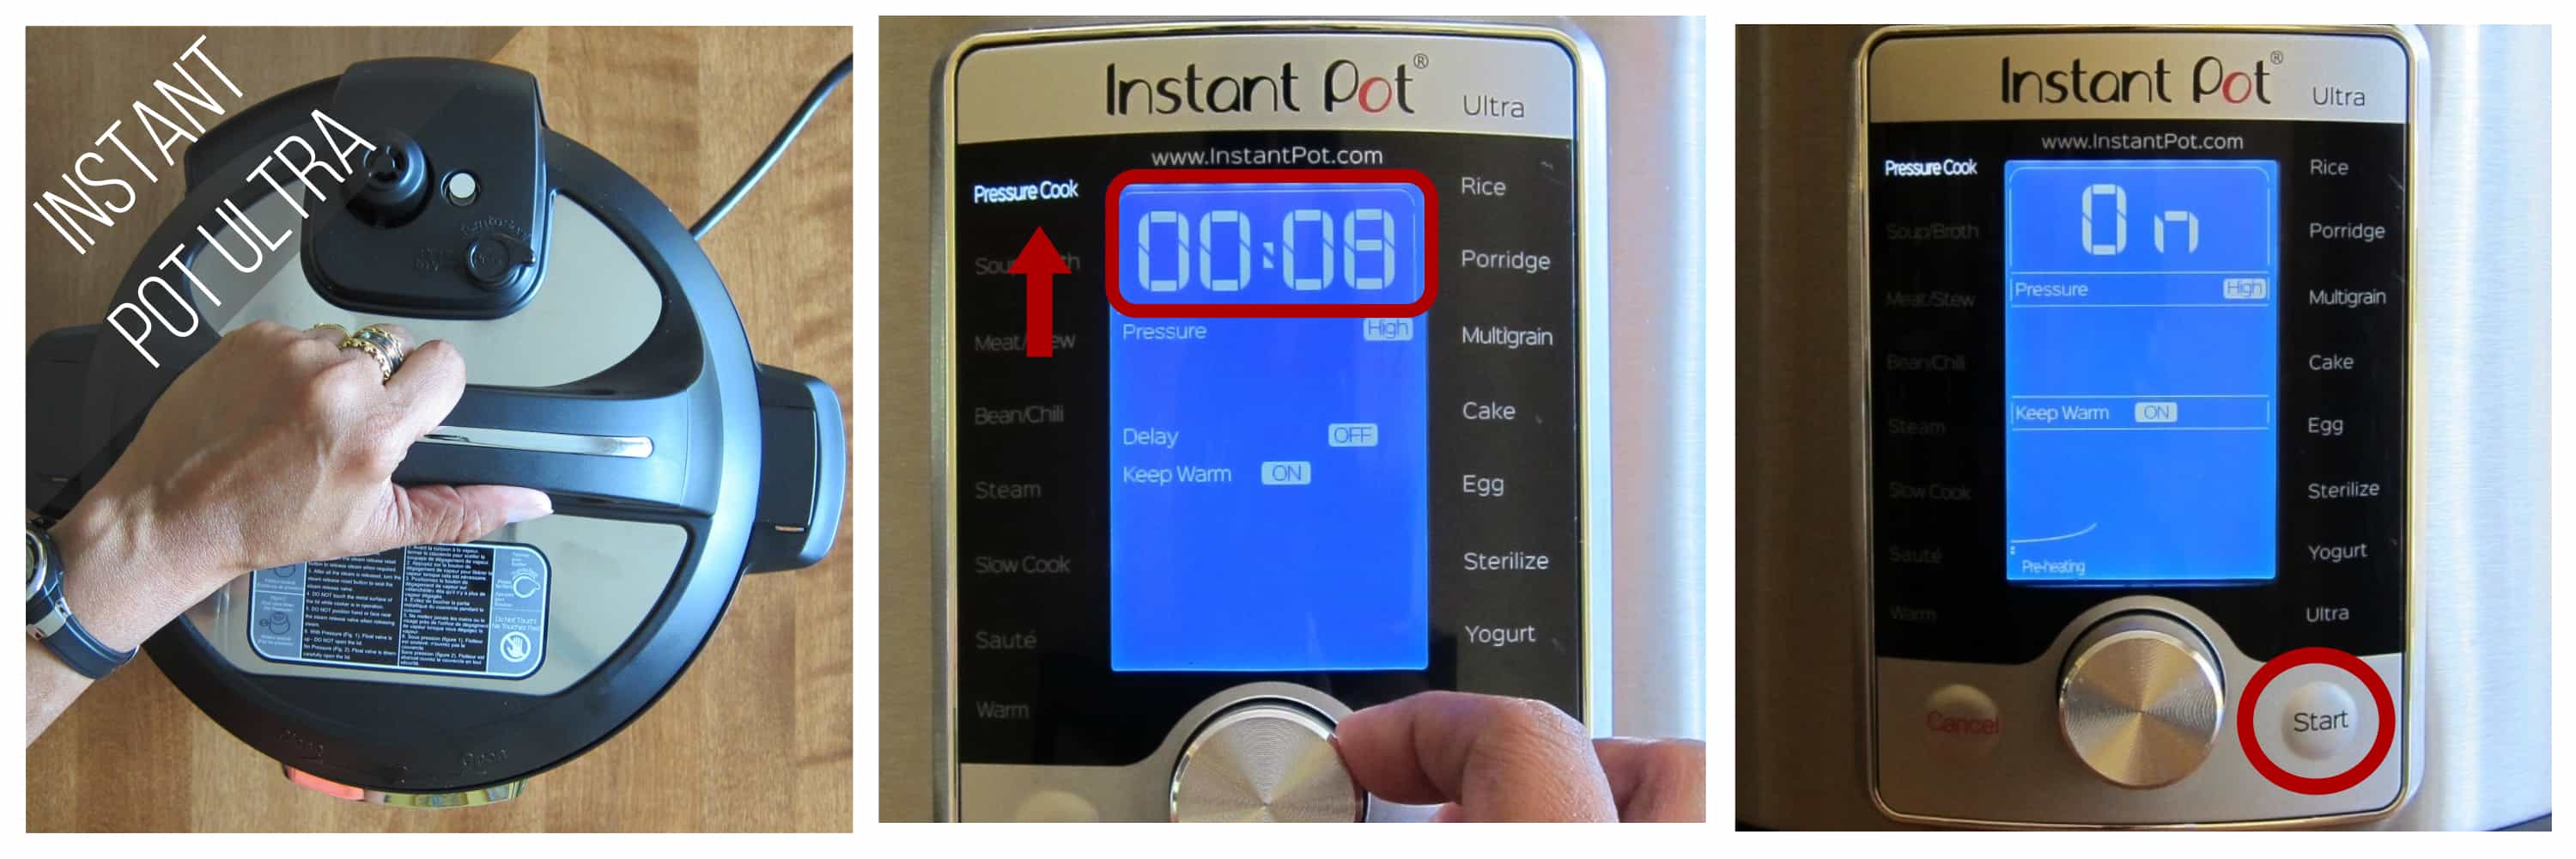 Instant Pot Ultra pressure cook 8 minutes collage - close Instant Pot Ultra, set time to 00:08 and select Pressure Cook, press start - Paint the Kitchen Red